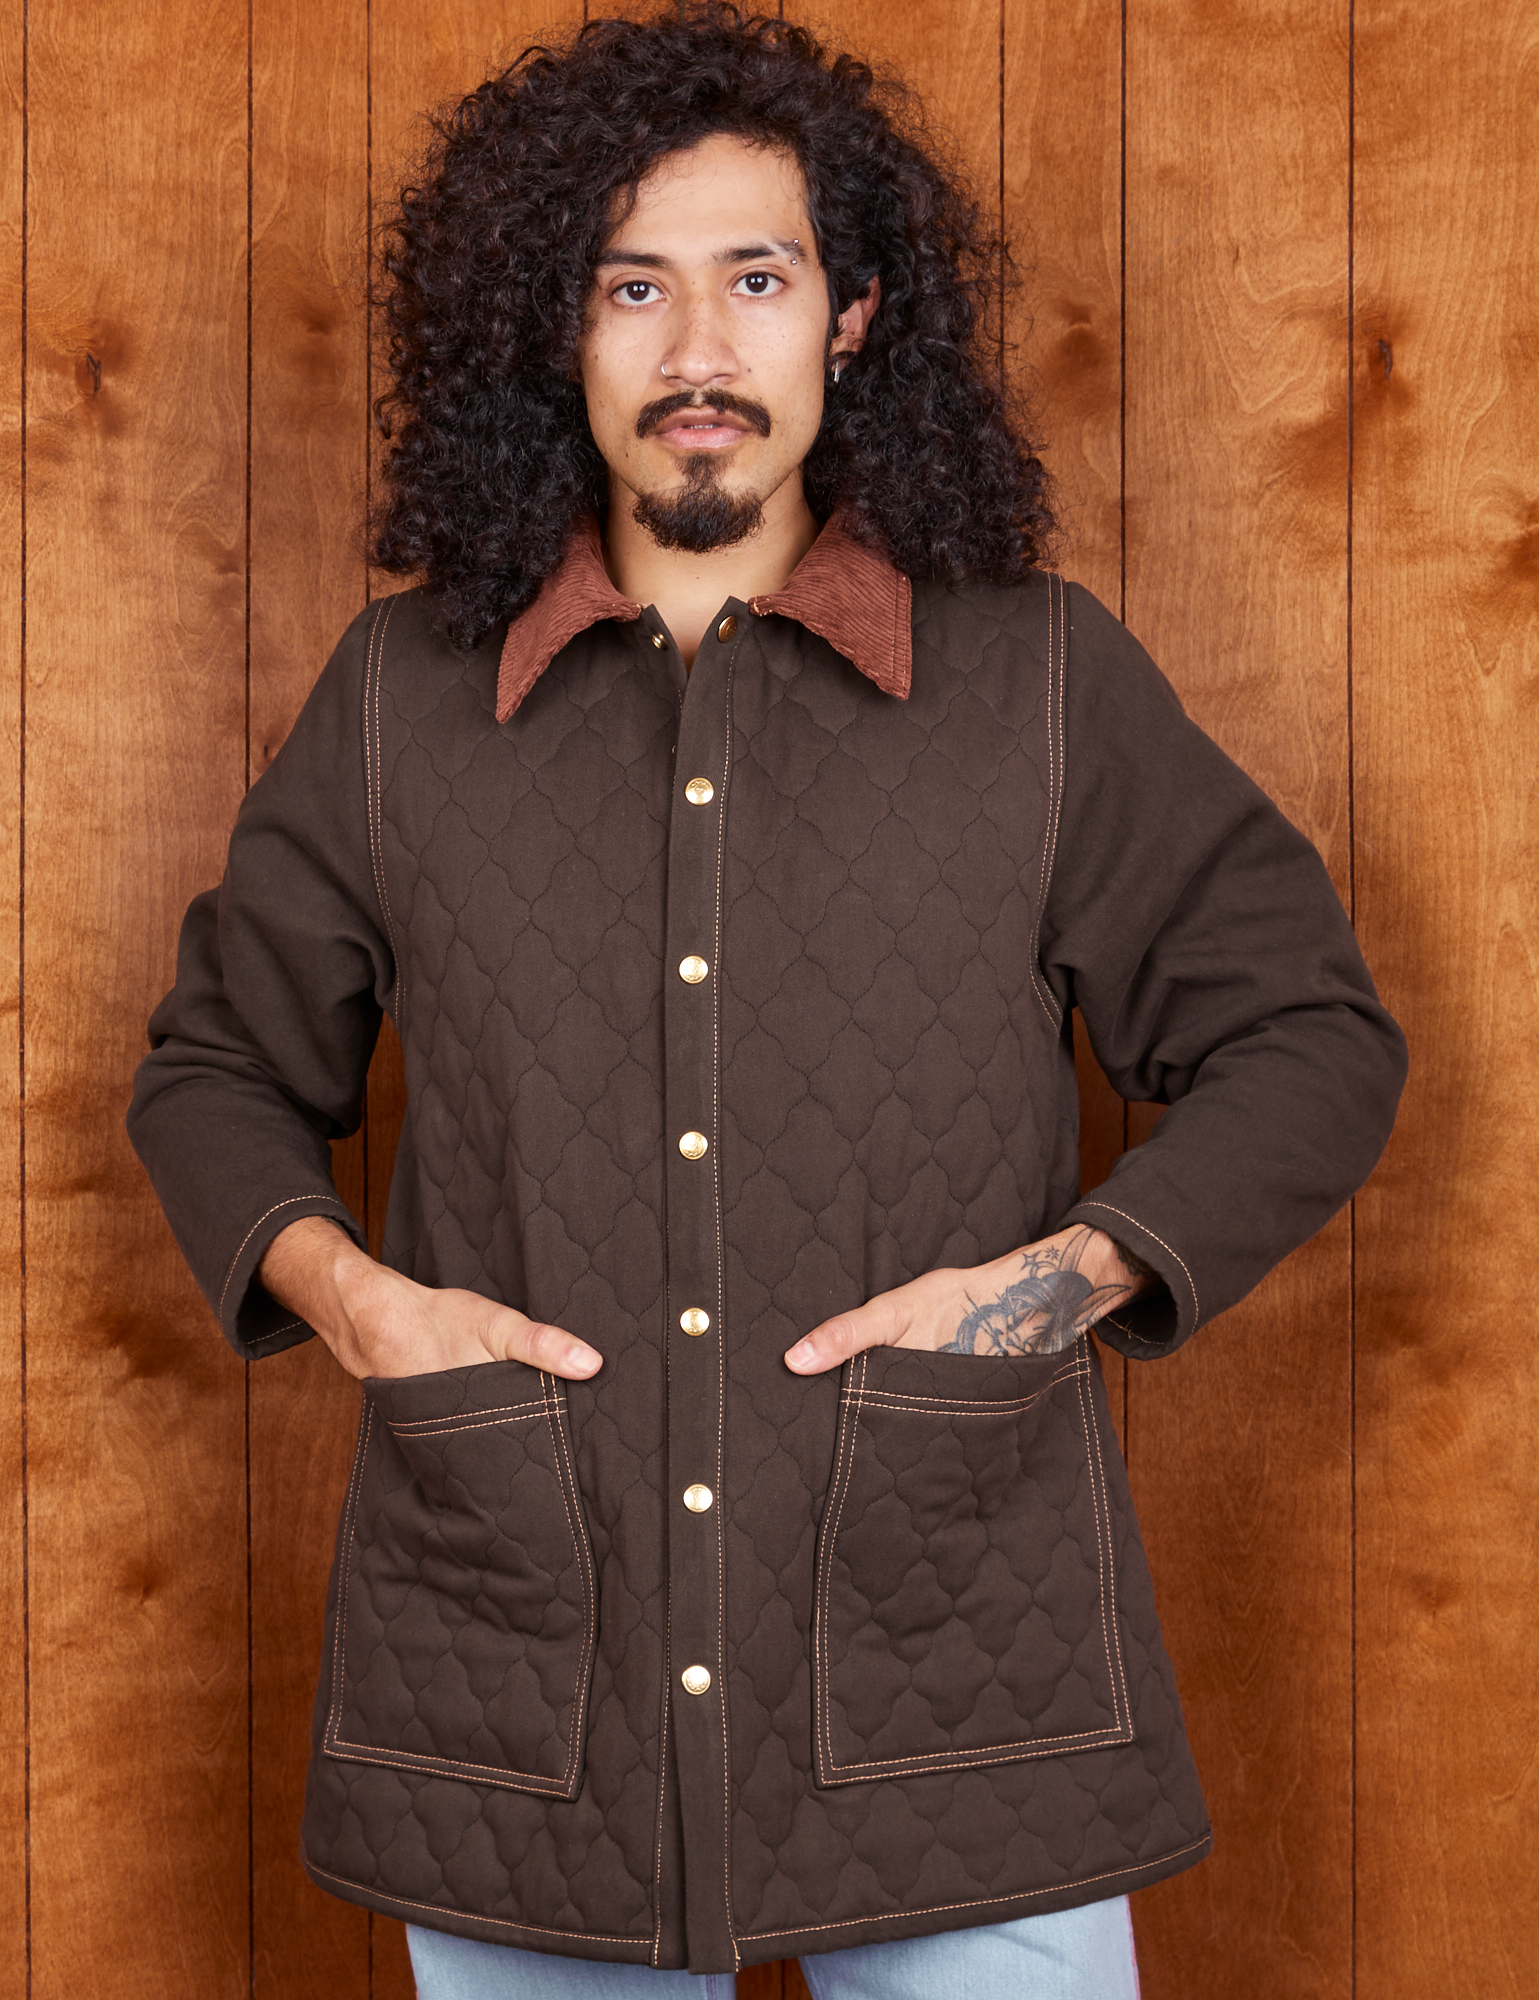 Jesse is wearing a buttoned up Quilted Overcoat in Espresso Brown. Both their hands are in the pockets.